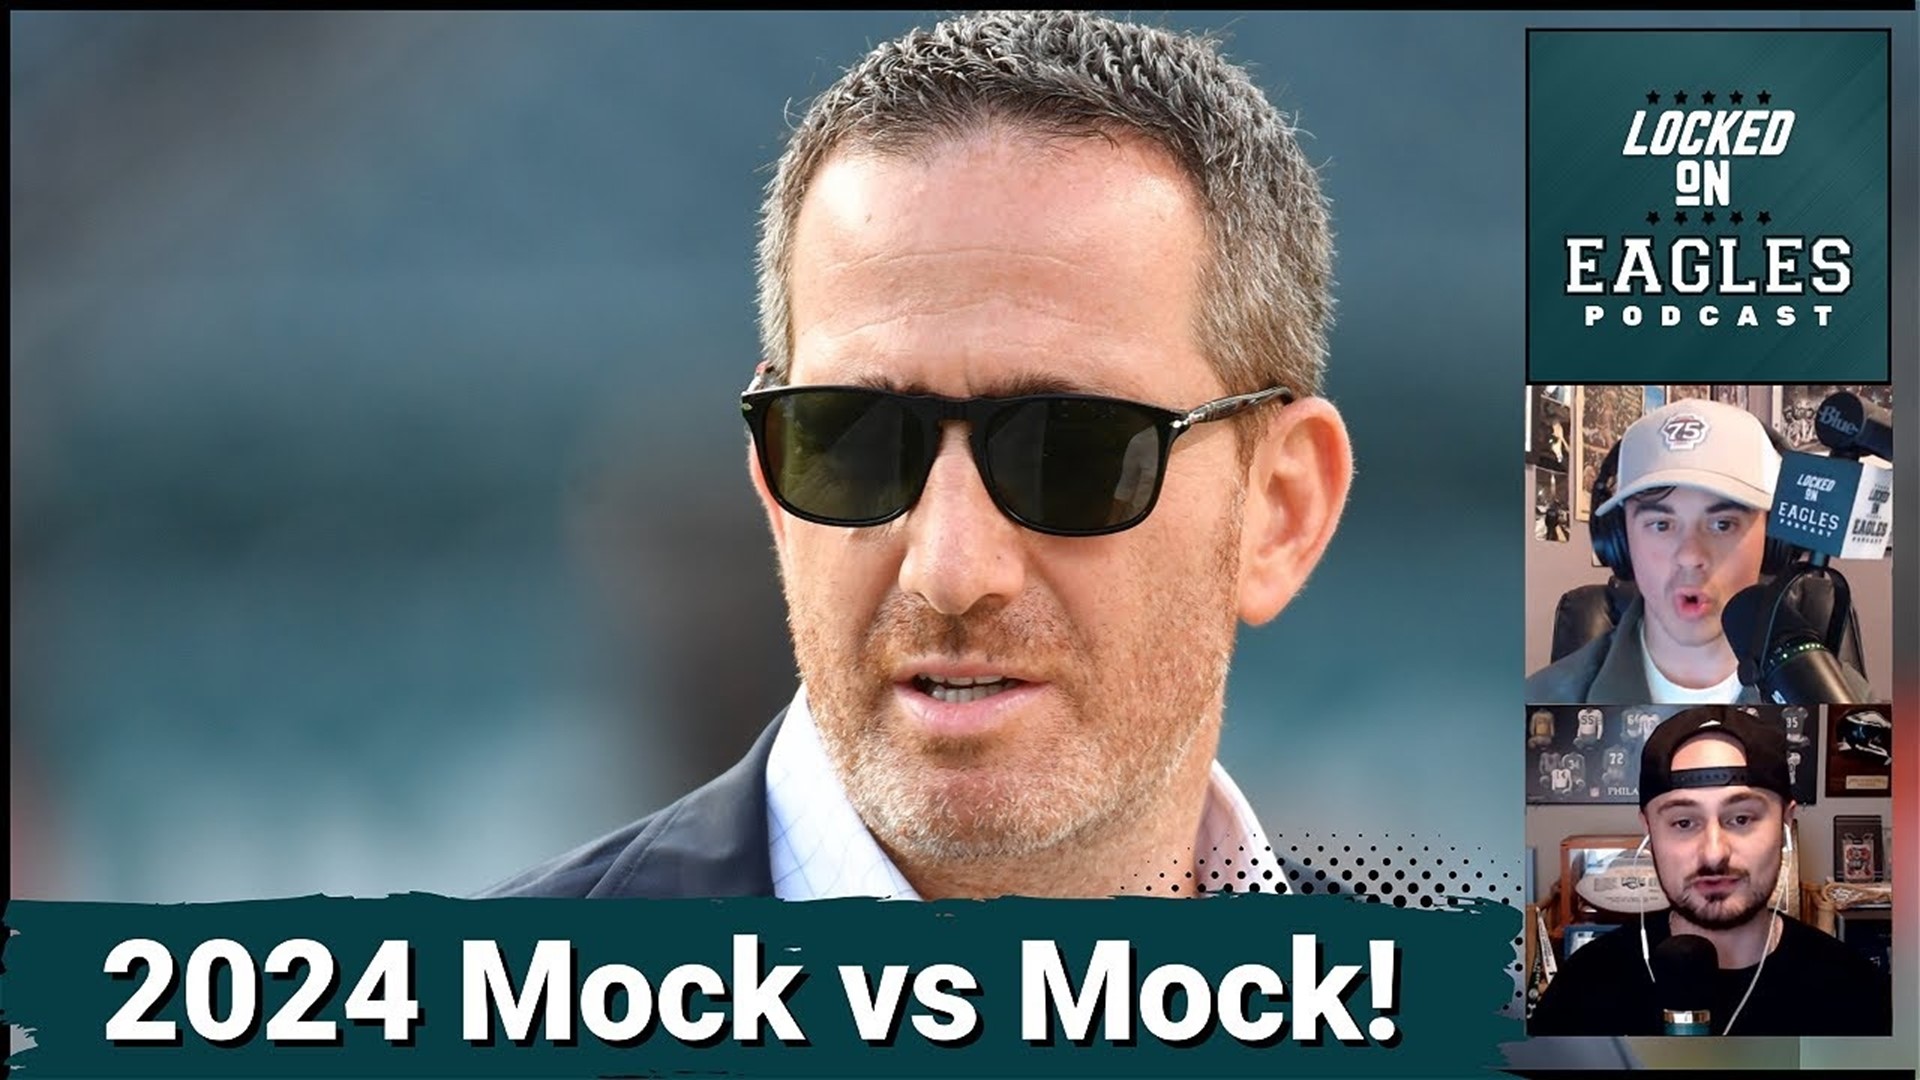 Louie and Gino go head to head in a mock draft battle! Who's 7-round Philadelphia Eagles mock draft was better?